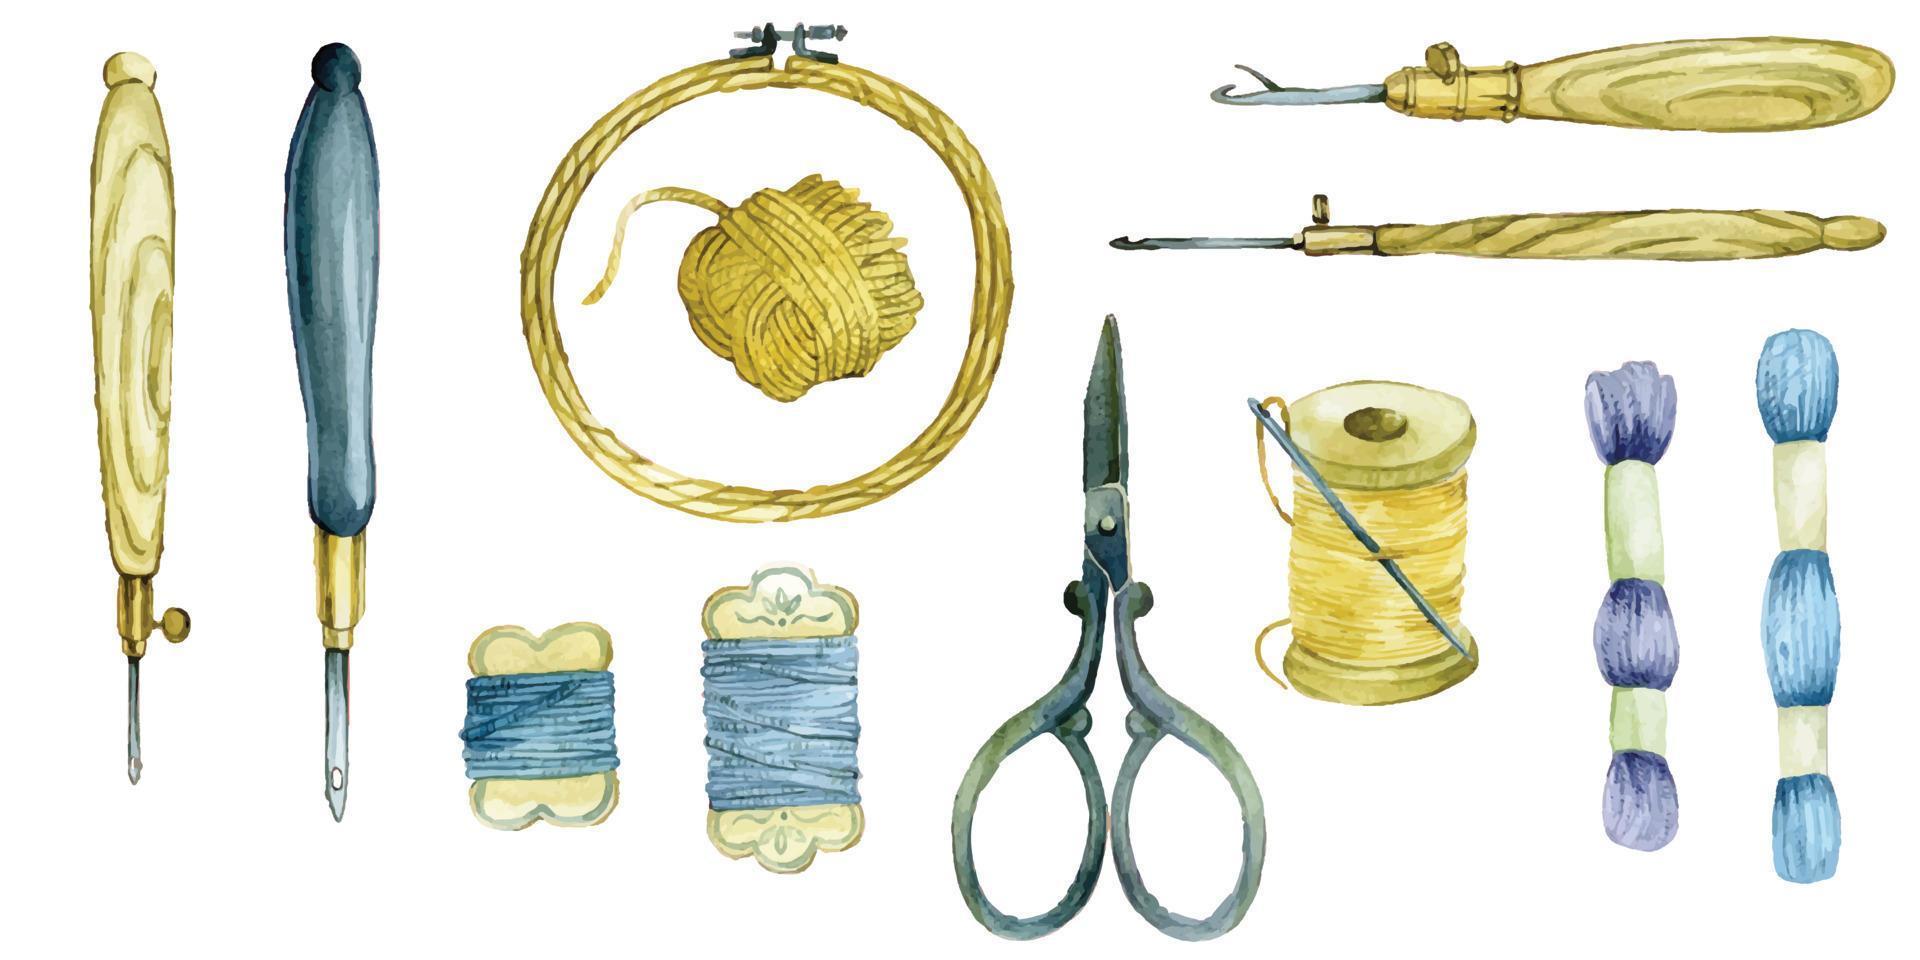 large watercolor set of tools for embroidery. hoops, threads, scissors, yarn, punch needle. tools for carpet embroidery and embroidery with beads, sequins. isolated on white background. vintage vector